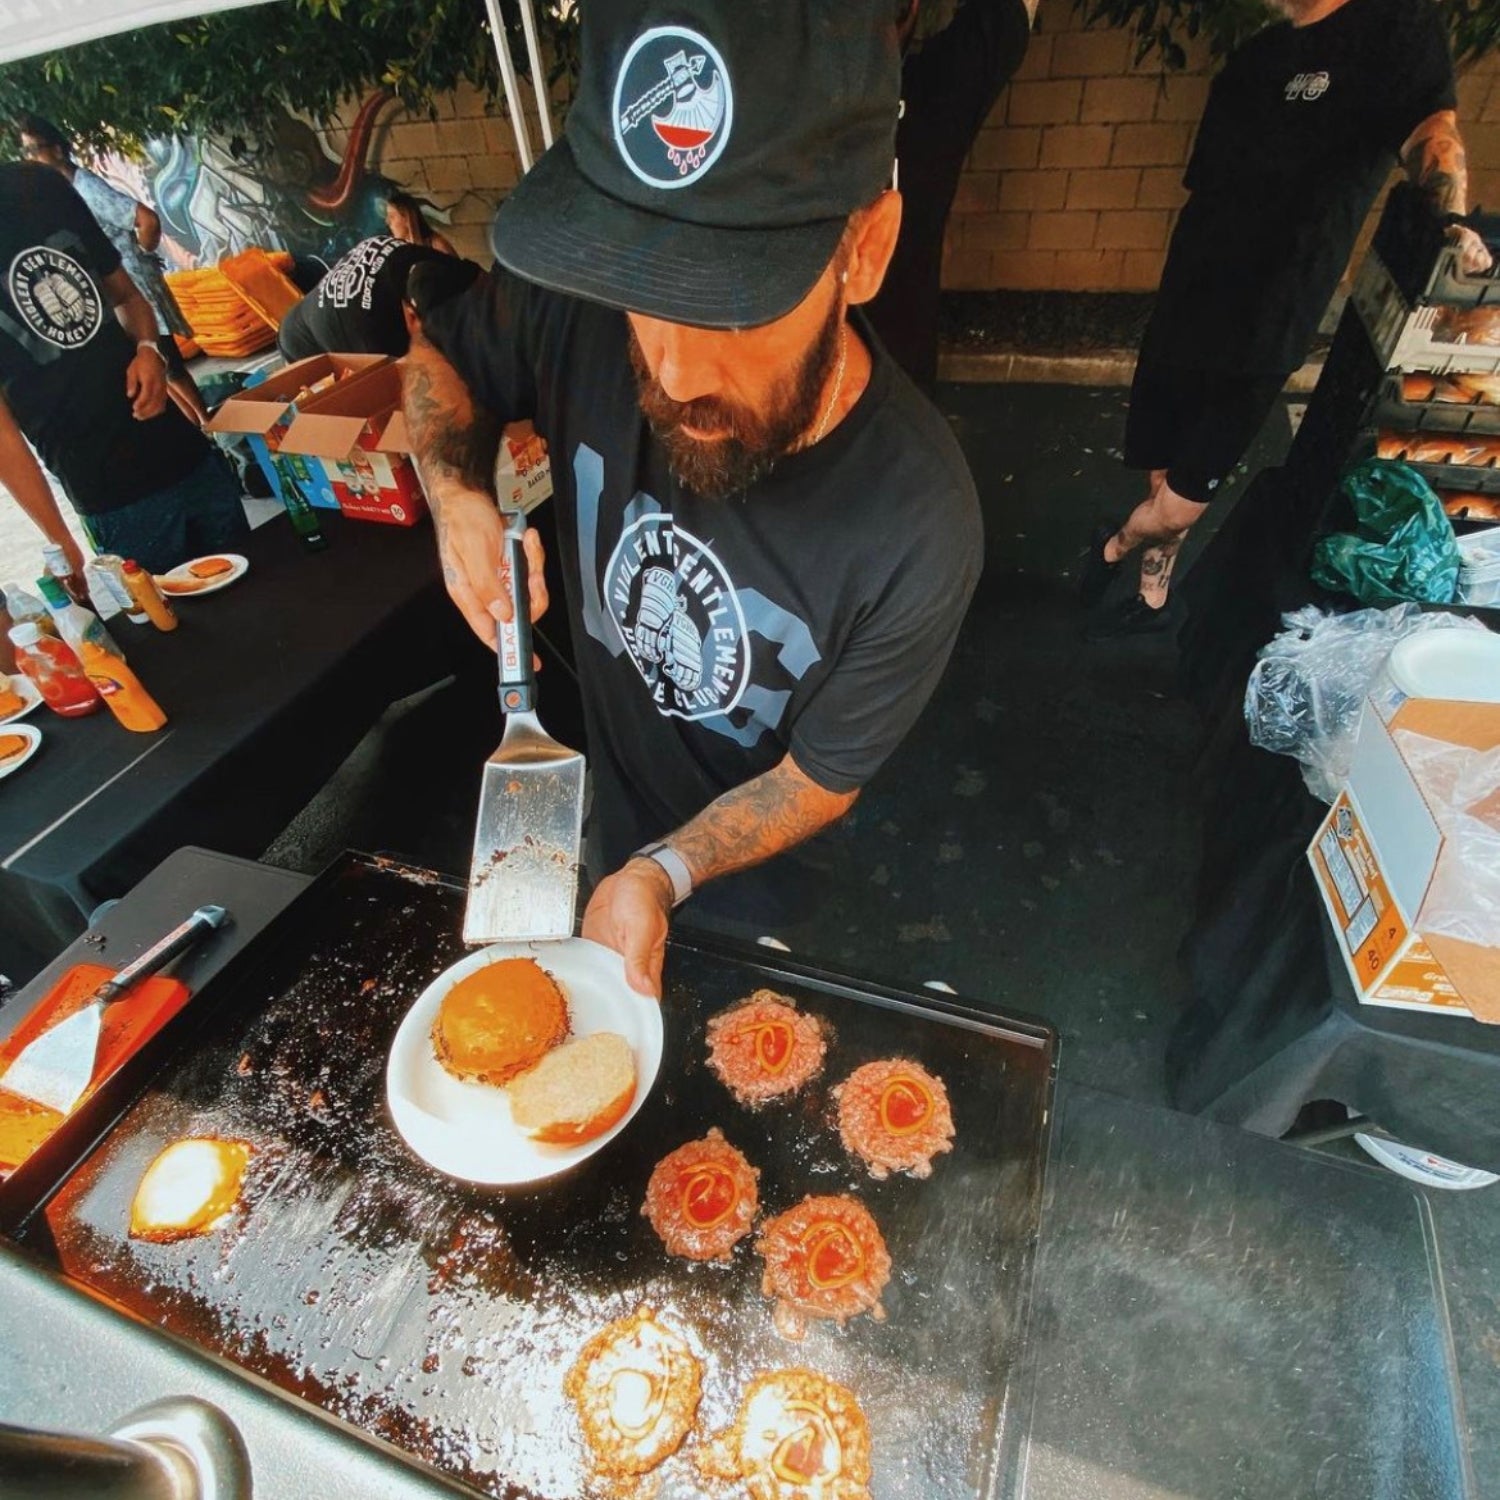 Lifetipsforbetterliving Hockey Clothing Company announces their Free Burger Friday kick offs on June 2nd in Keitele, California. Text your buds and start planning some trips down to VG HQ! In the meantime, take a look at these snapshots from previous FBFs. 